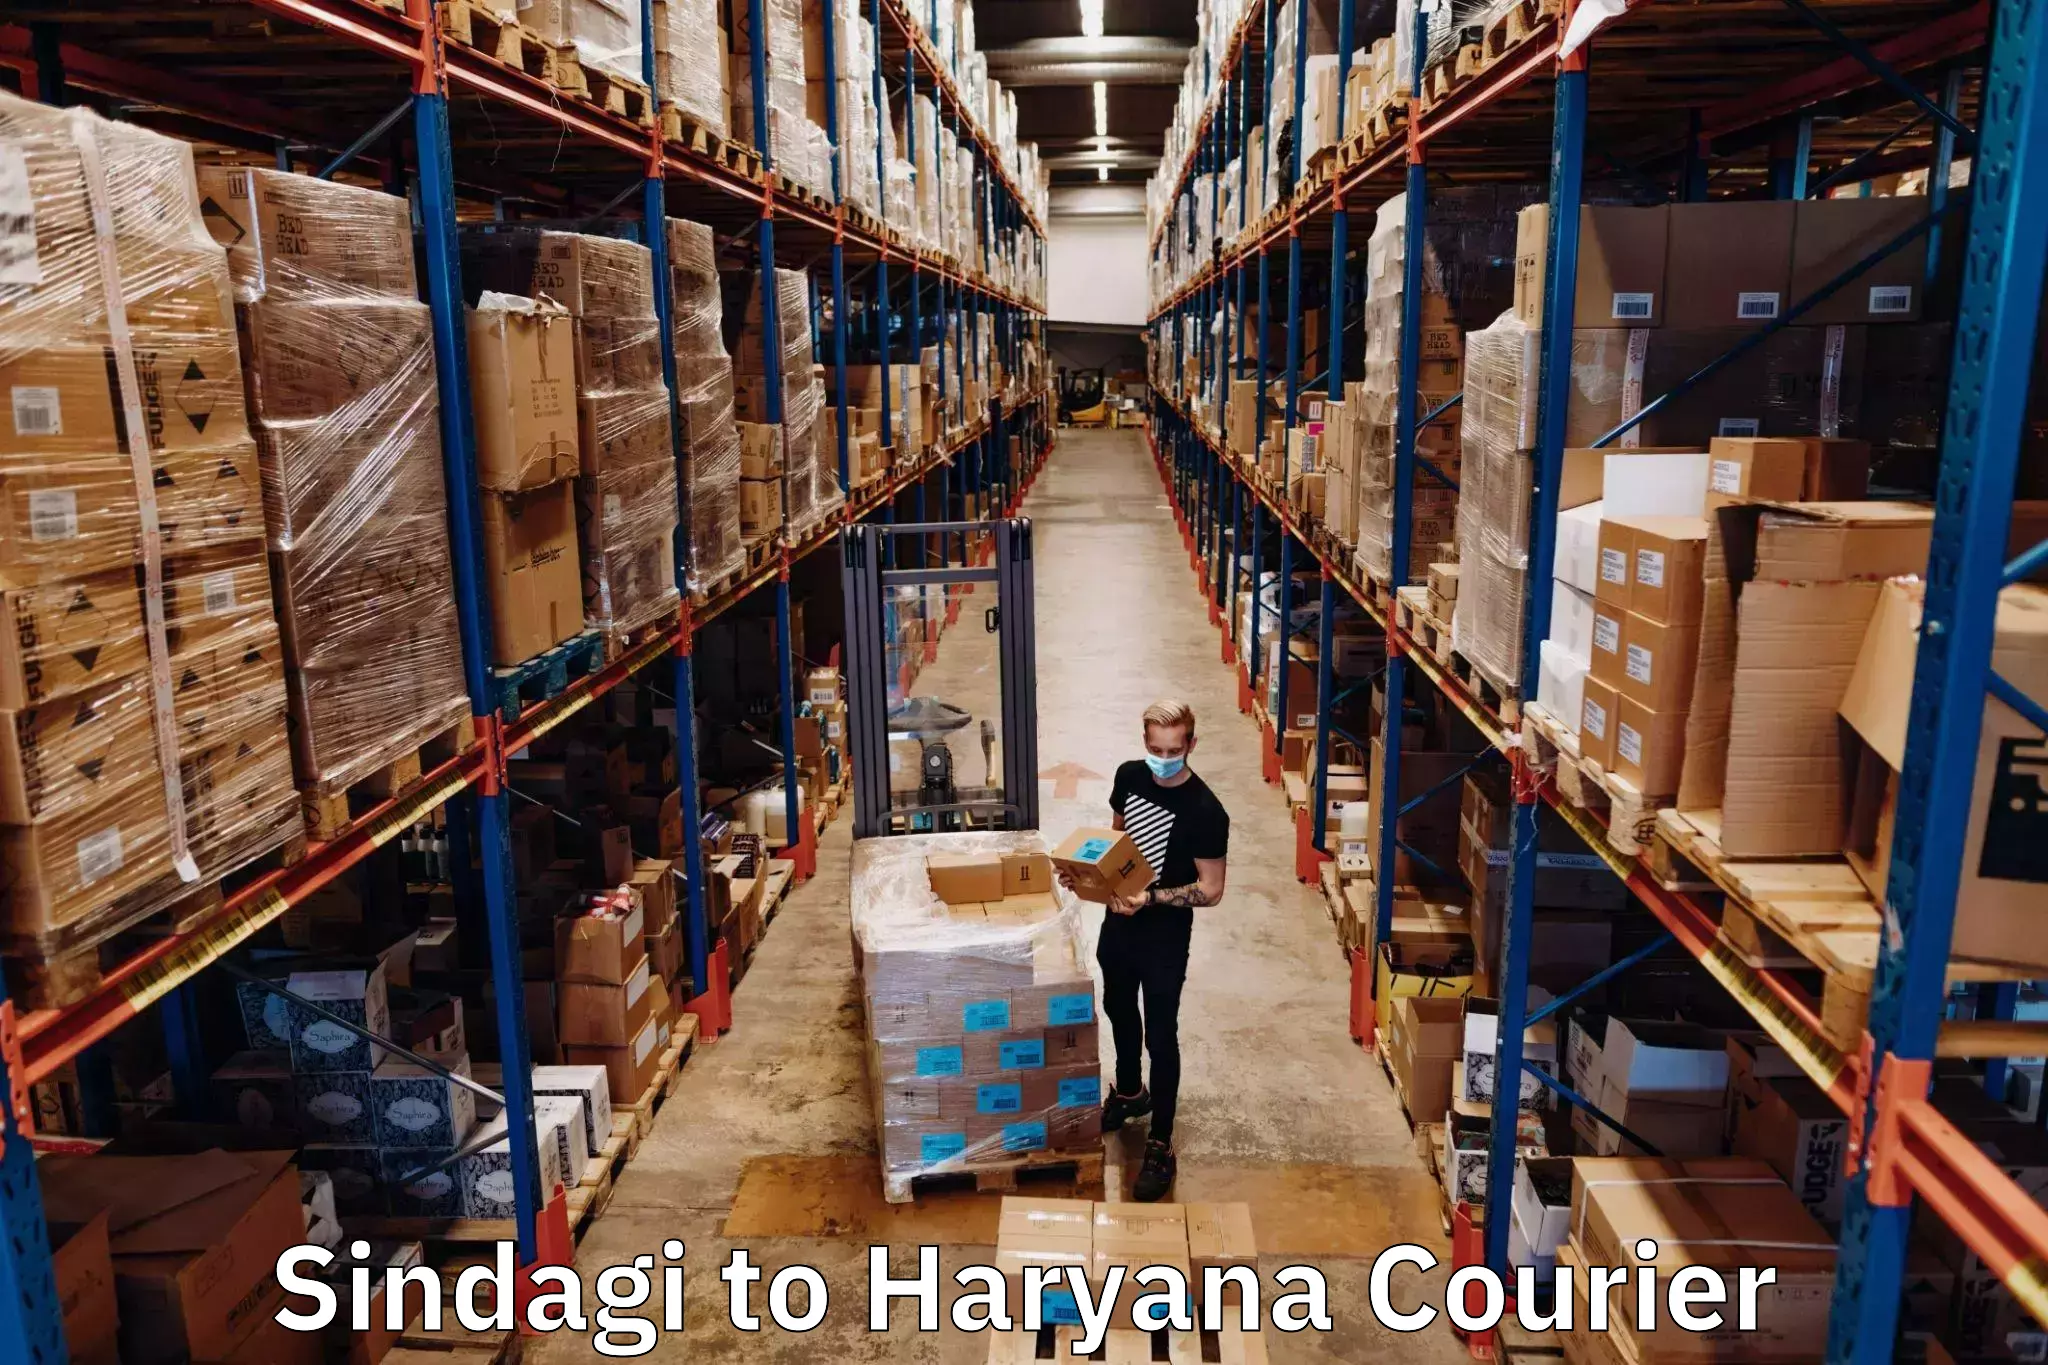 Courier service innovation in Sindagi to Haryana